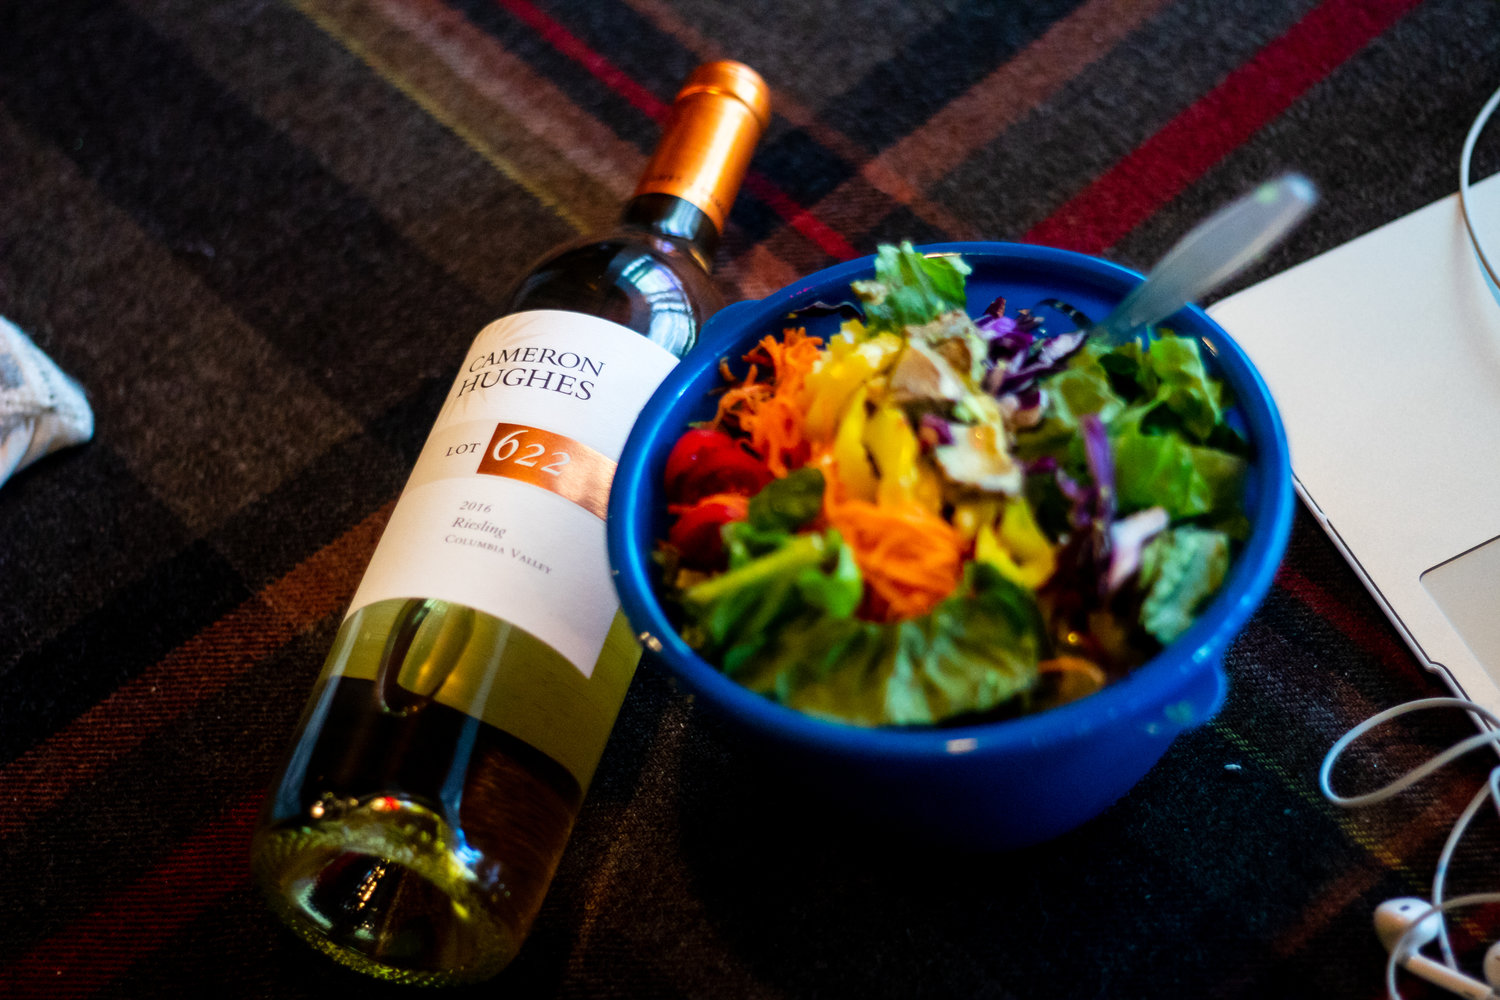 Fresh salad bowl paired with Cameron Hughes Wine Lot 622 Riesling